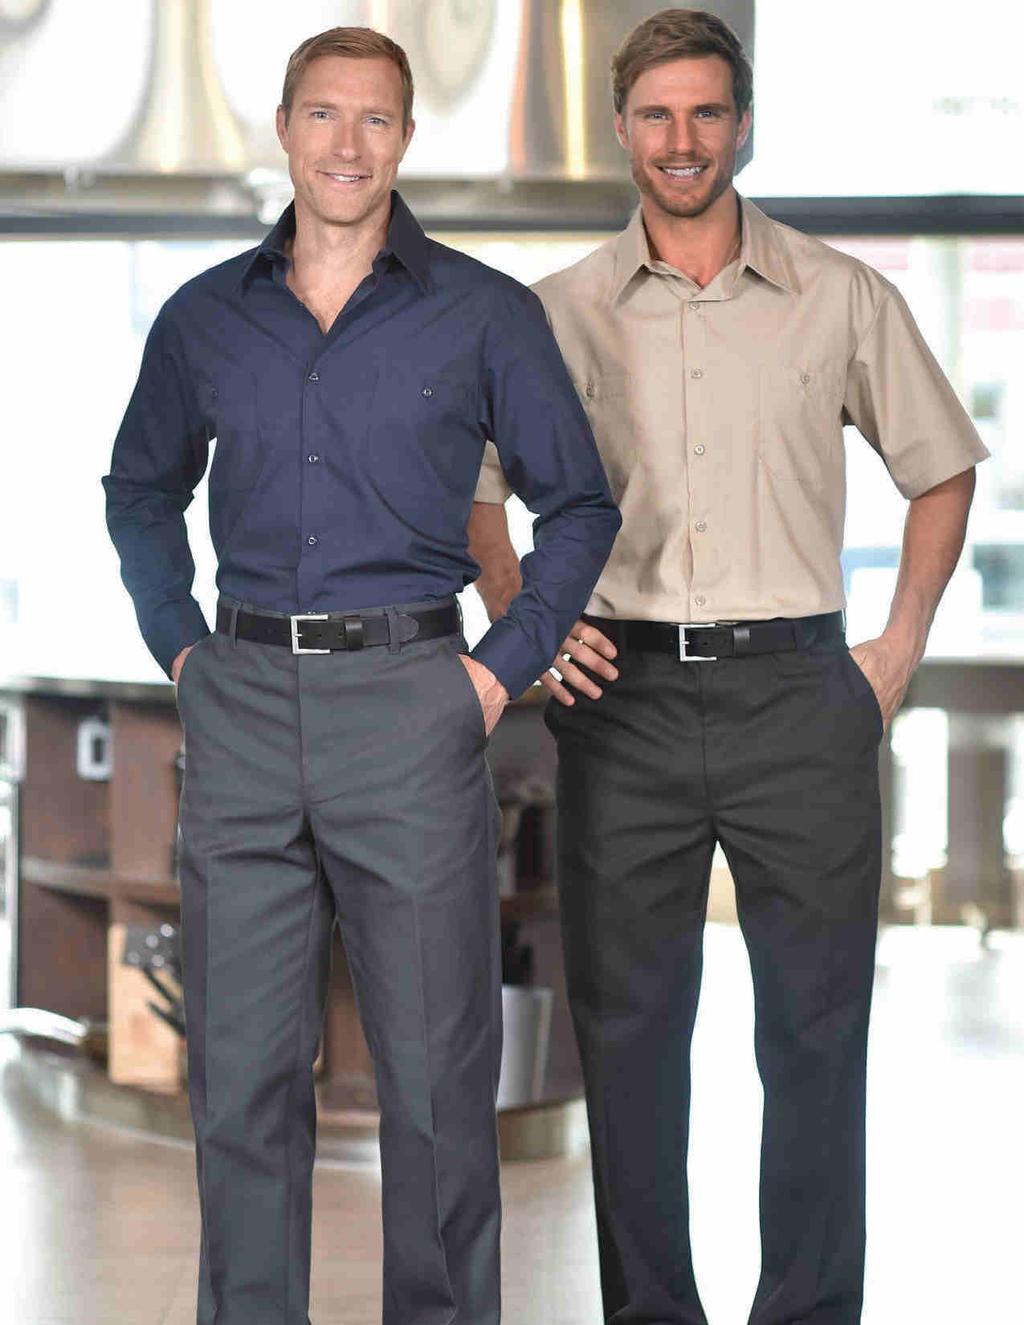 WORK SHIRTS s391a s39101 Work Wear Demanding work requires workwear that can meet those tough demands day in and day out.